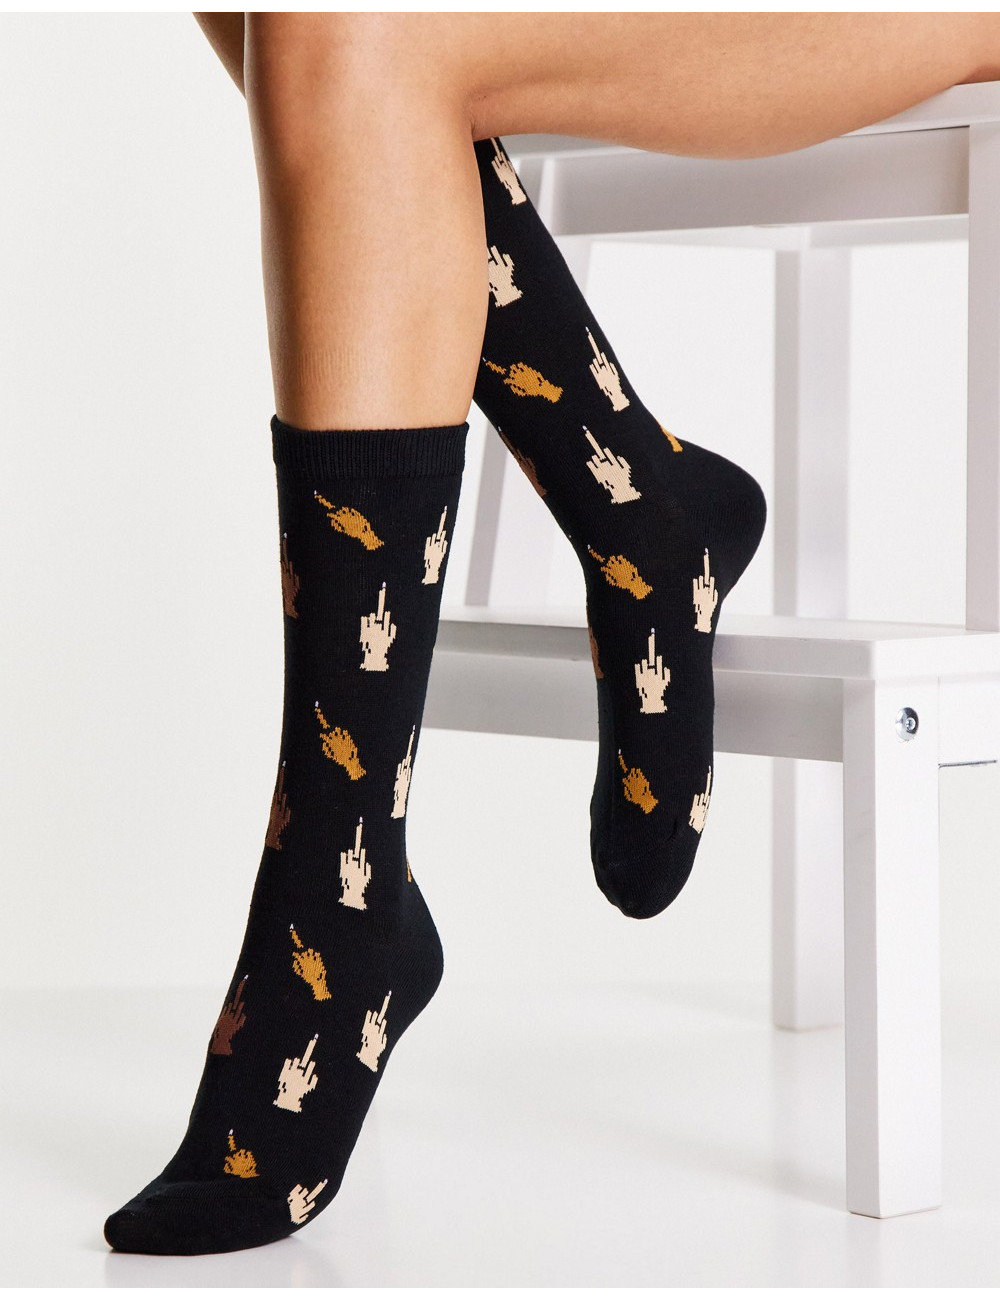 Typo socks with middle...